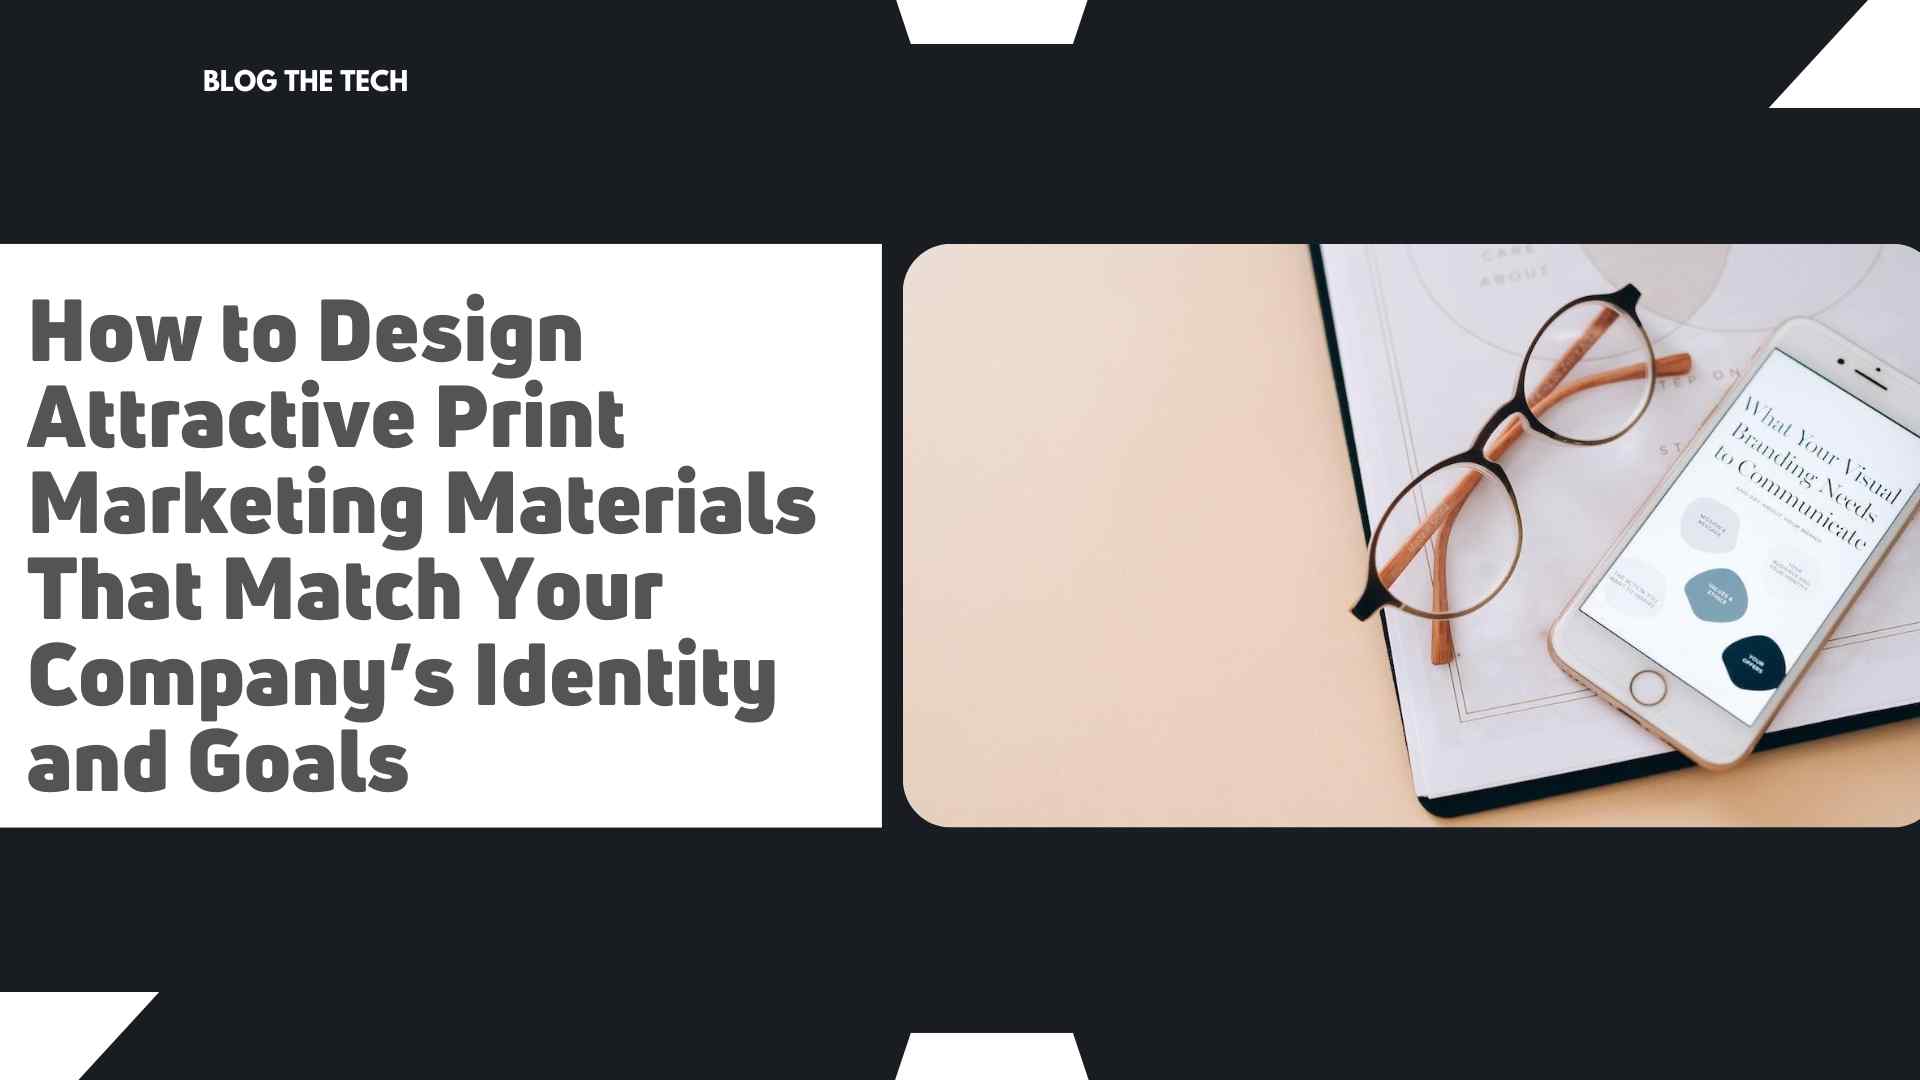 How to Design Attractive Print Marketing Materials That Match Your Companys Identity and Goals